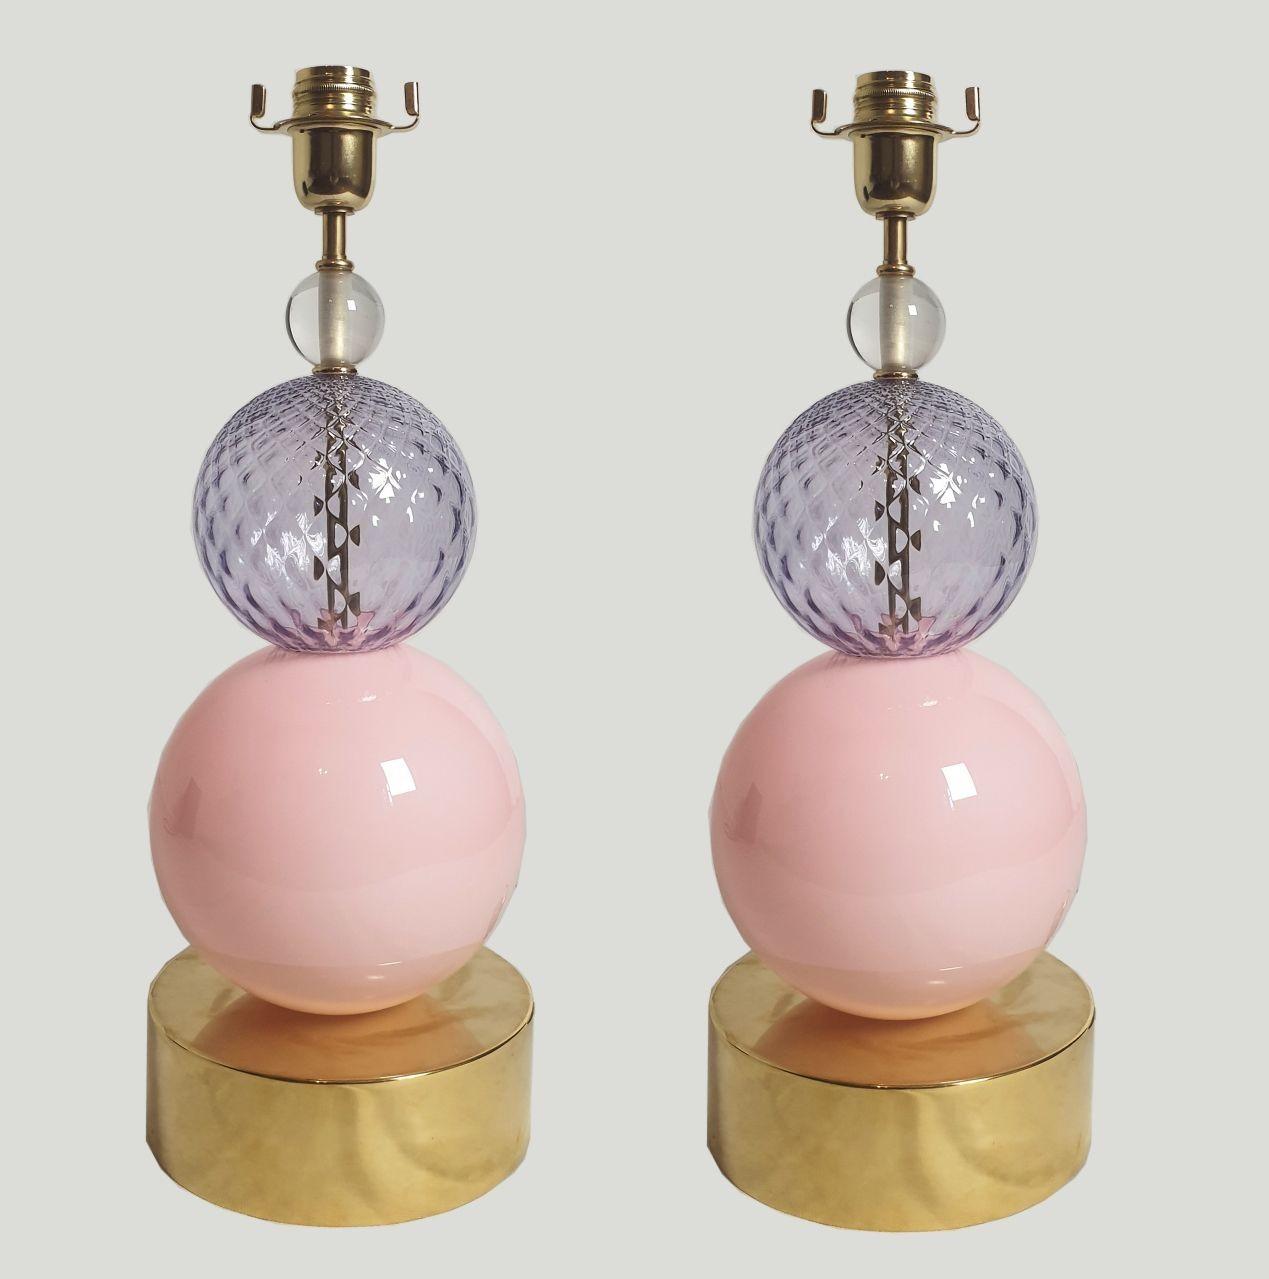 Pair of Mid Century Modern Murano glass table lamps, Italy Venini style 1980s.
The vintage table or desk lamps are made of a polished brass cylindrical base, two large pink and lavender Murano glass balls
and a small transparent plain Murano glass